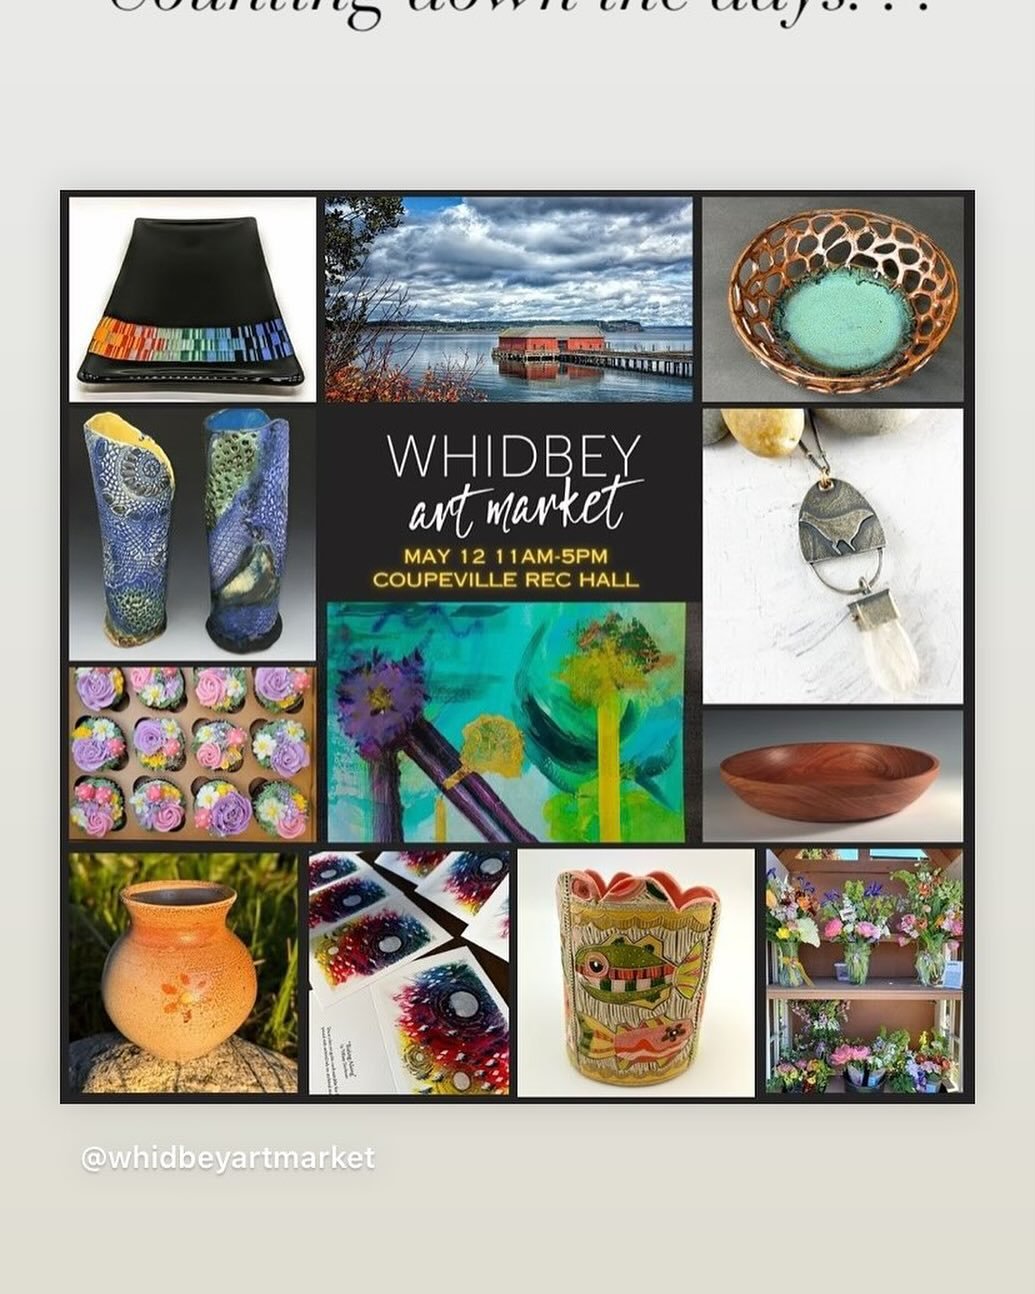 Counting down the days. . .

#whidbeyartmarket 
#mybrownwren